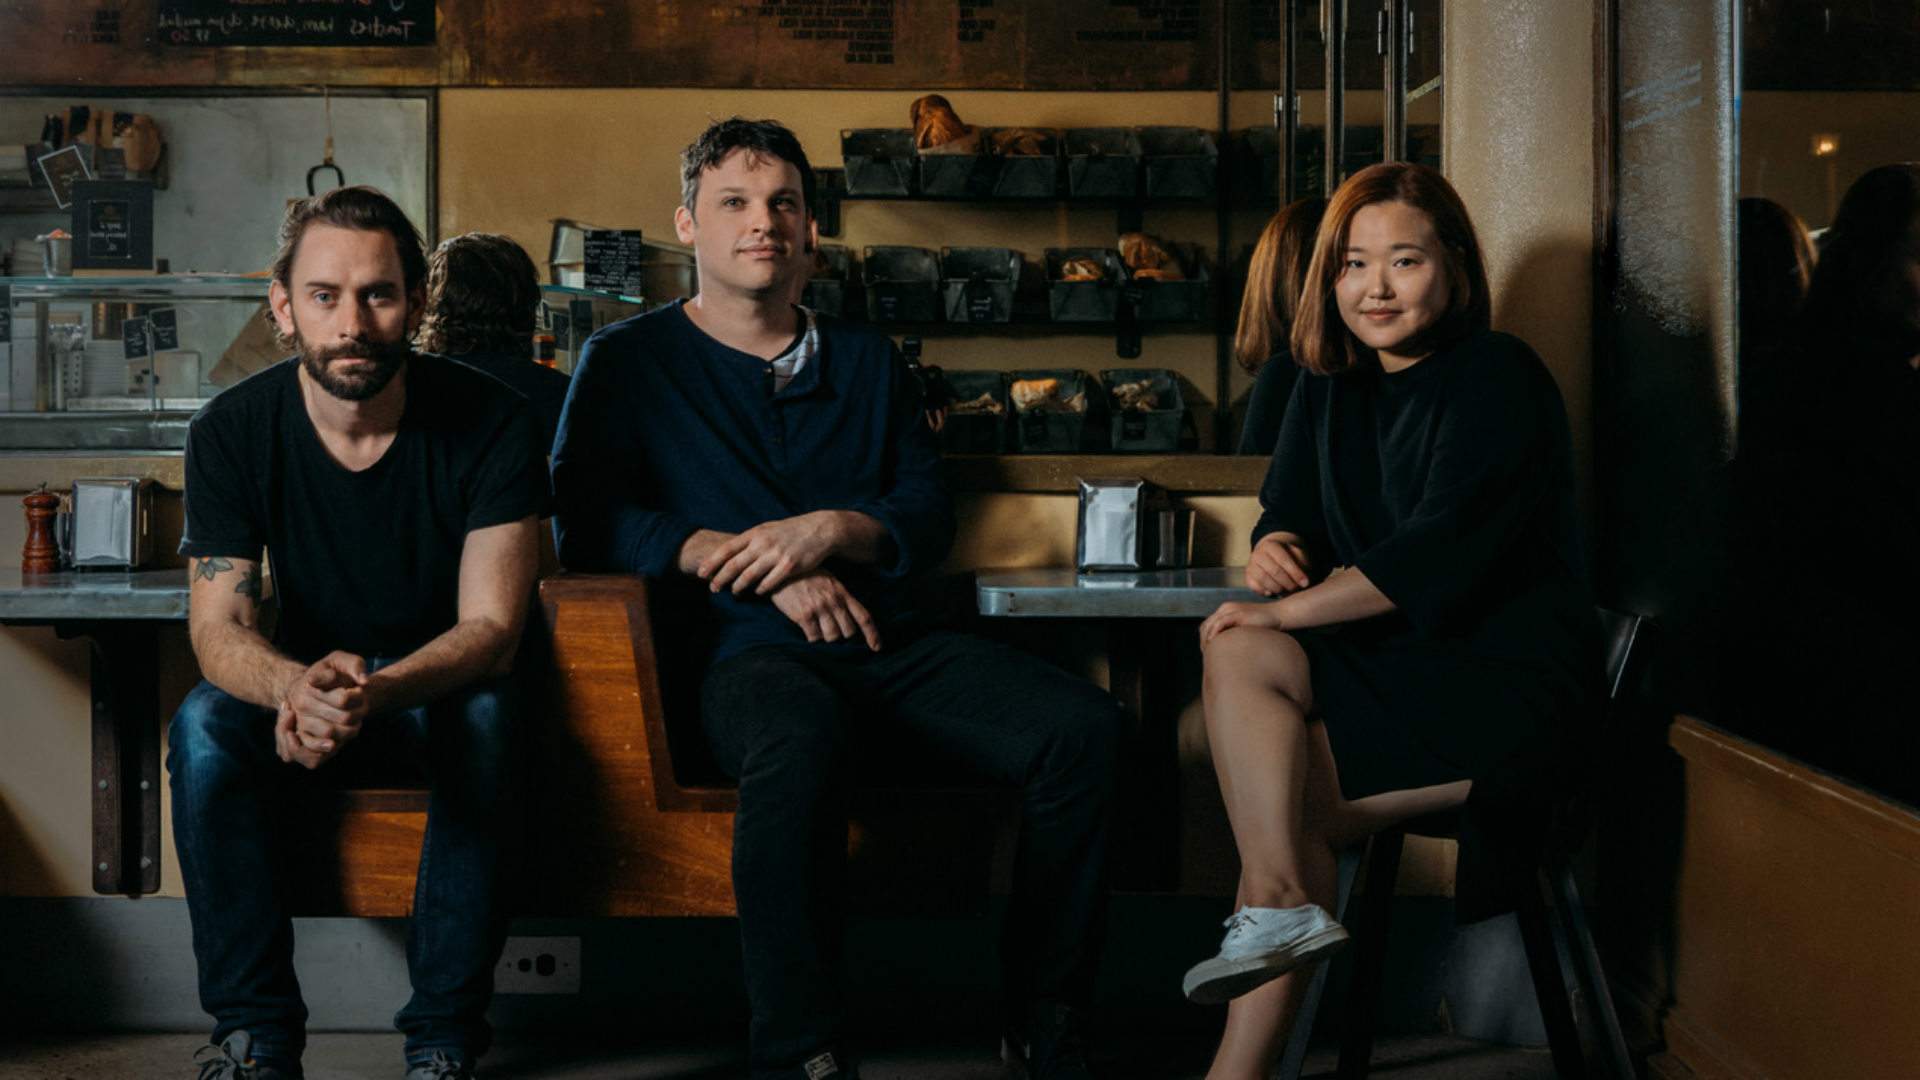 Moon Park Team to Open New All-Day Eatery in Potts Point